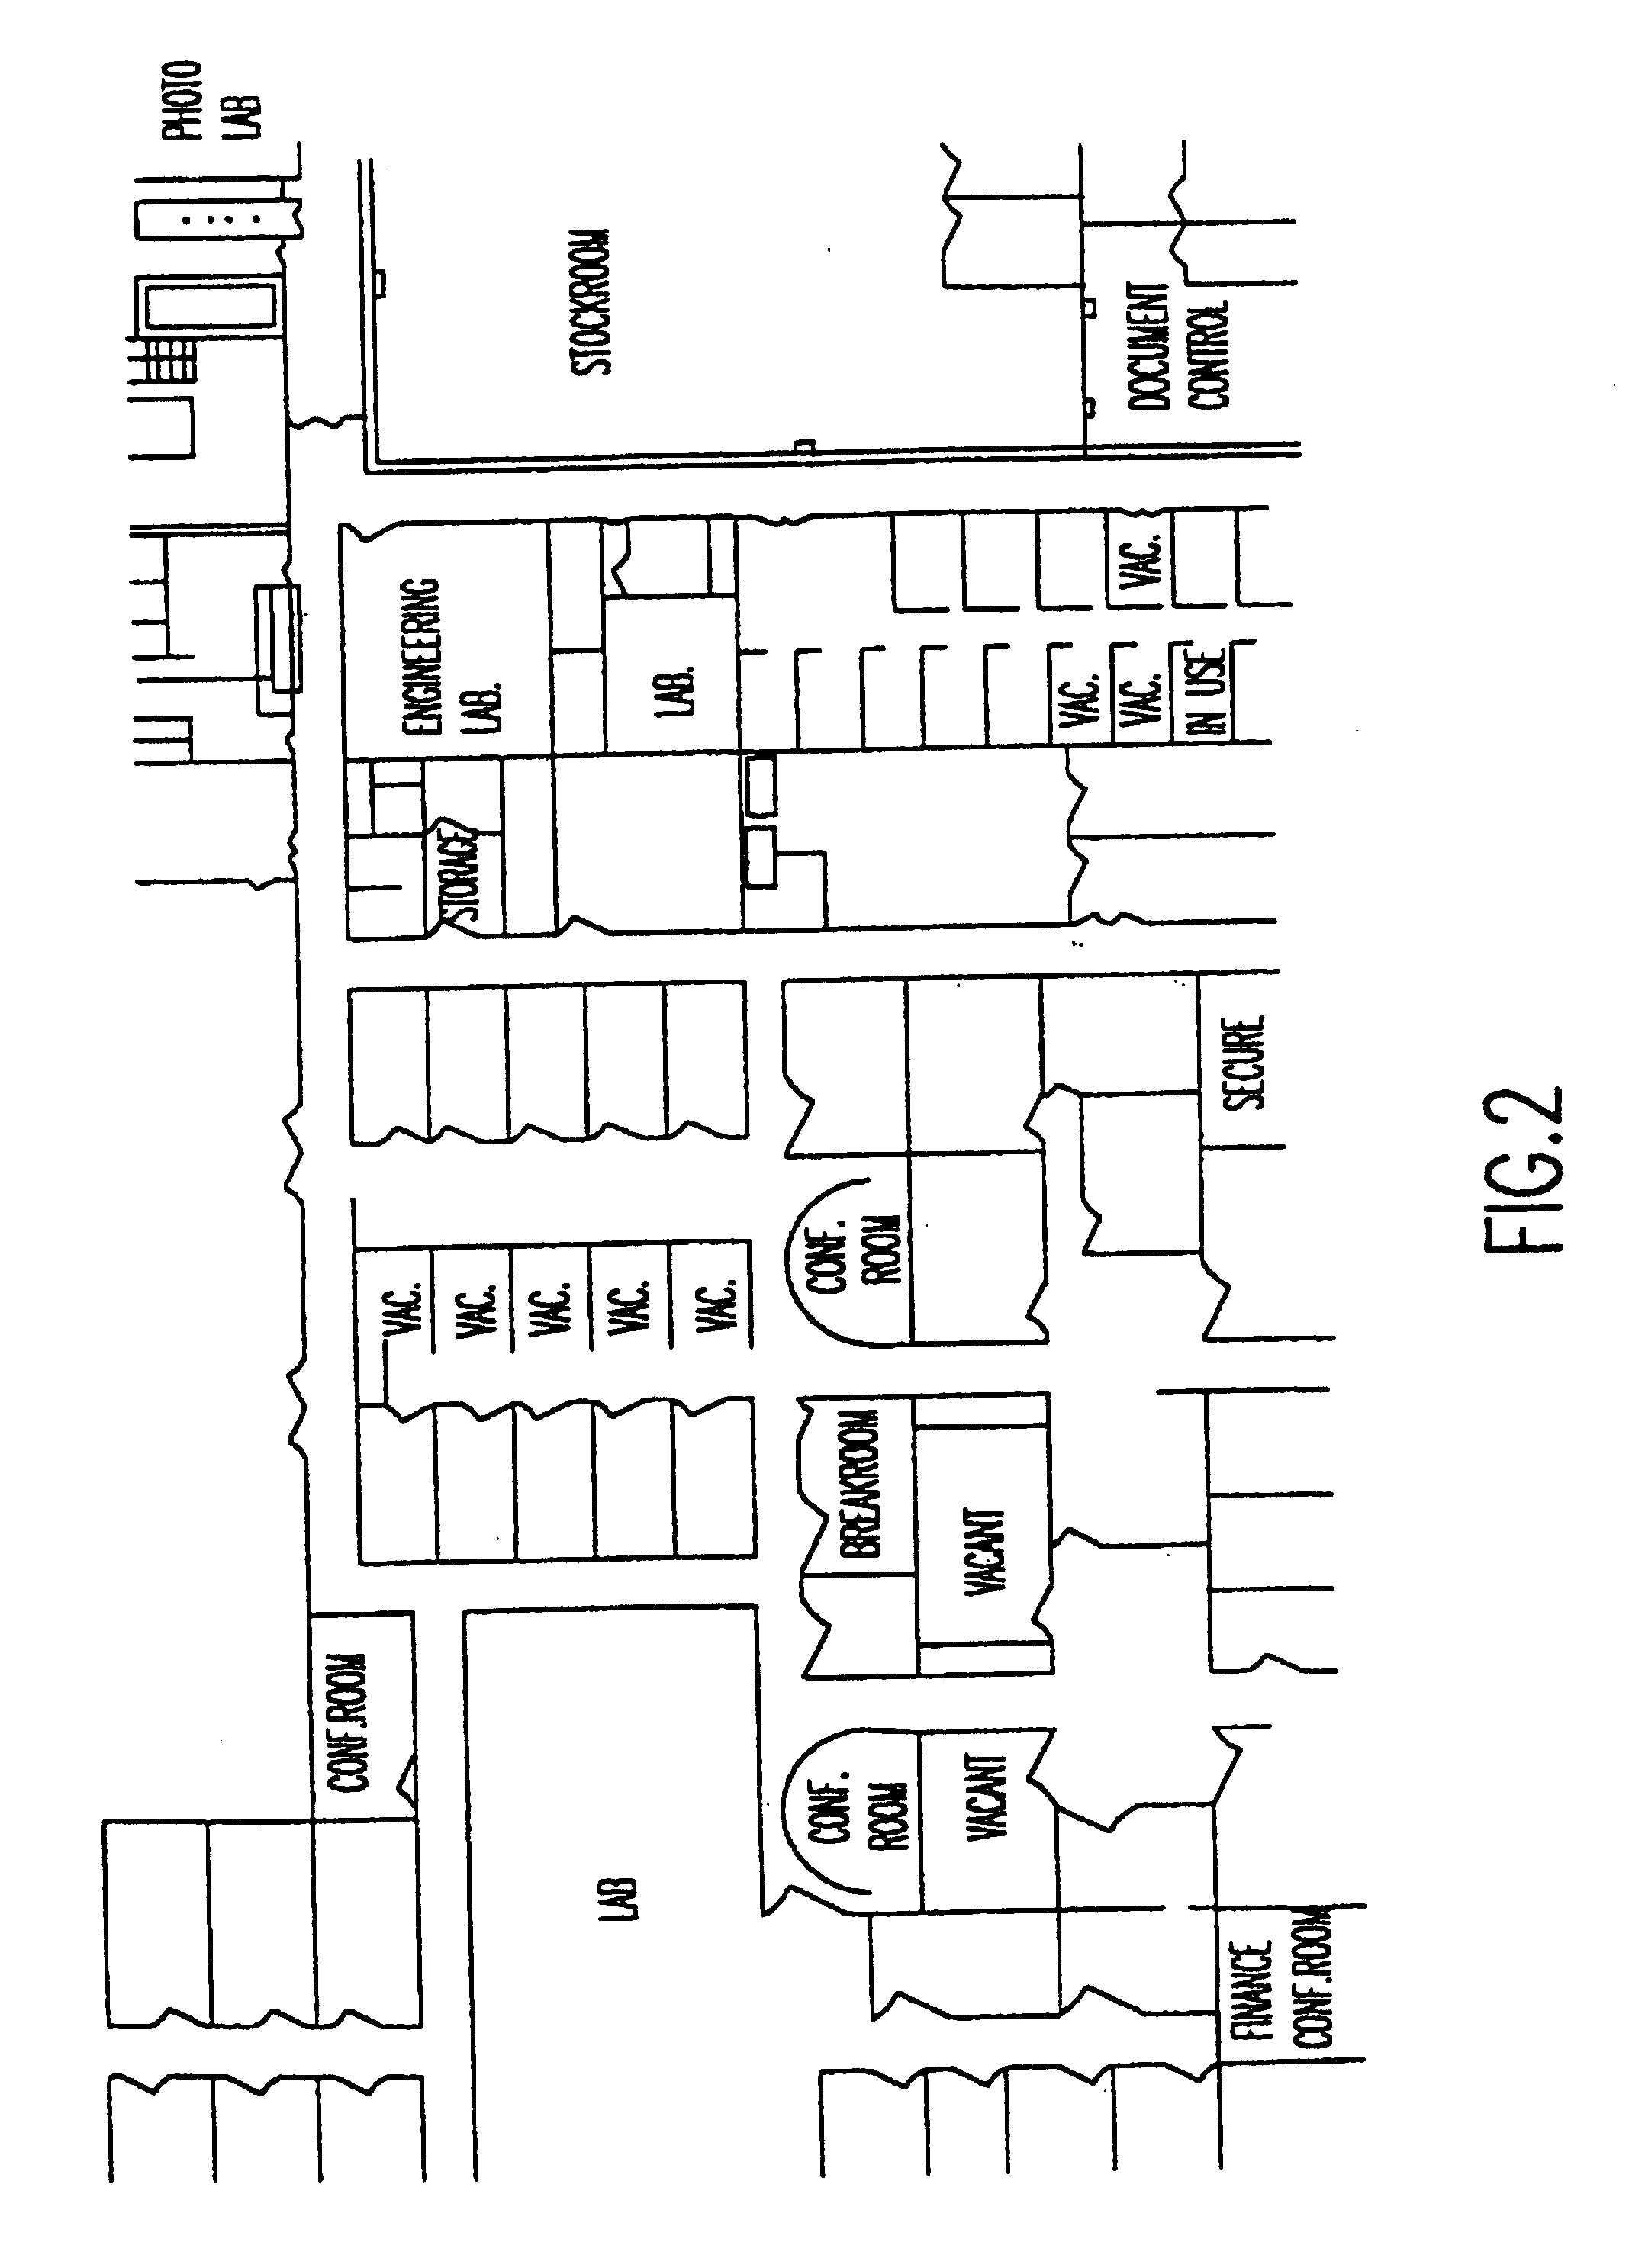 Method and system for a building database manipulator